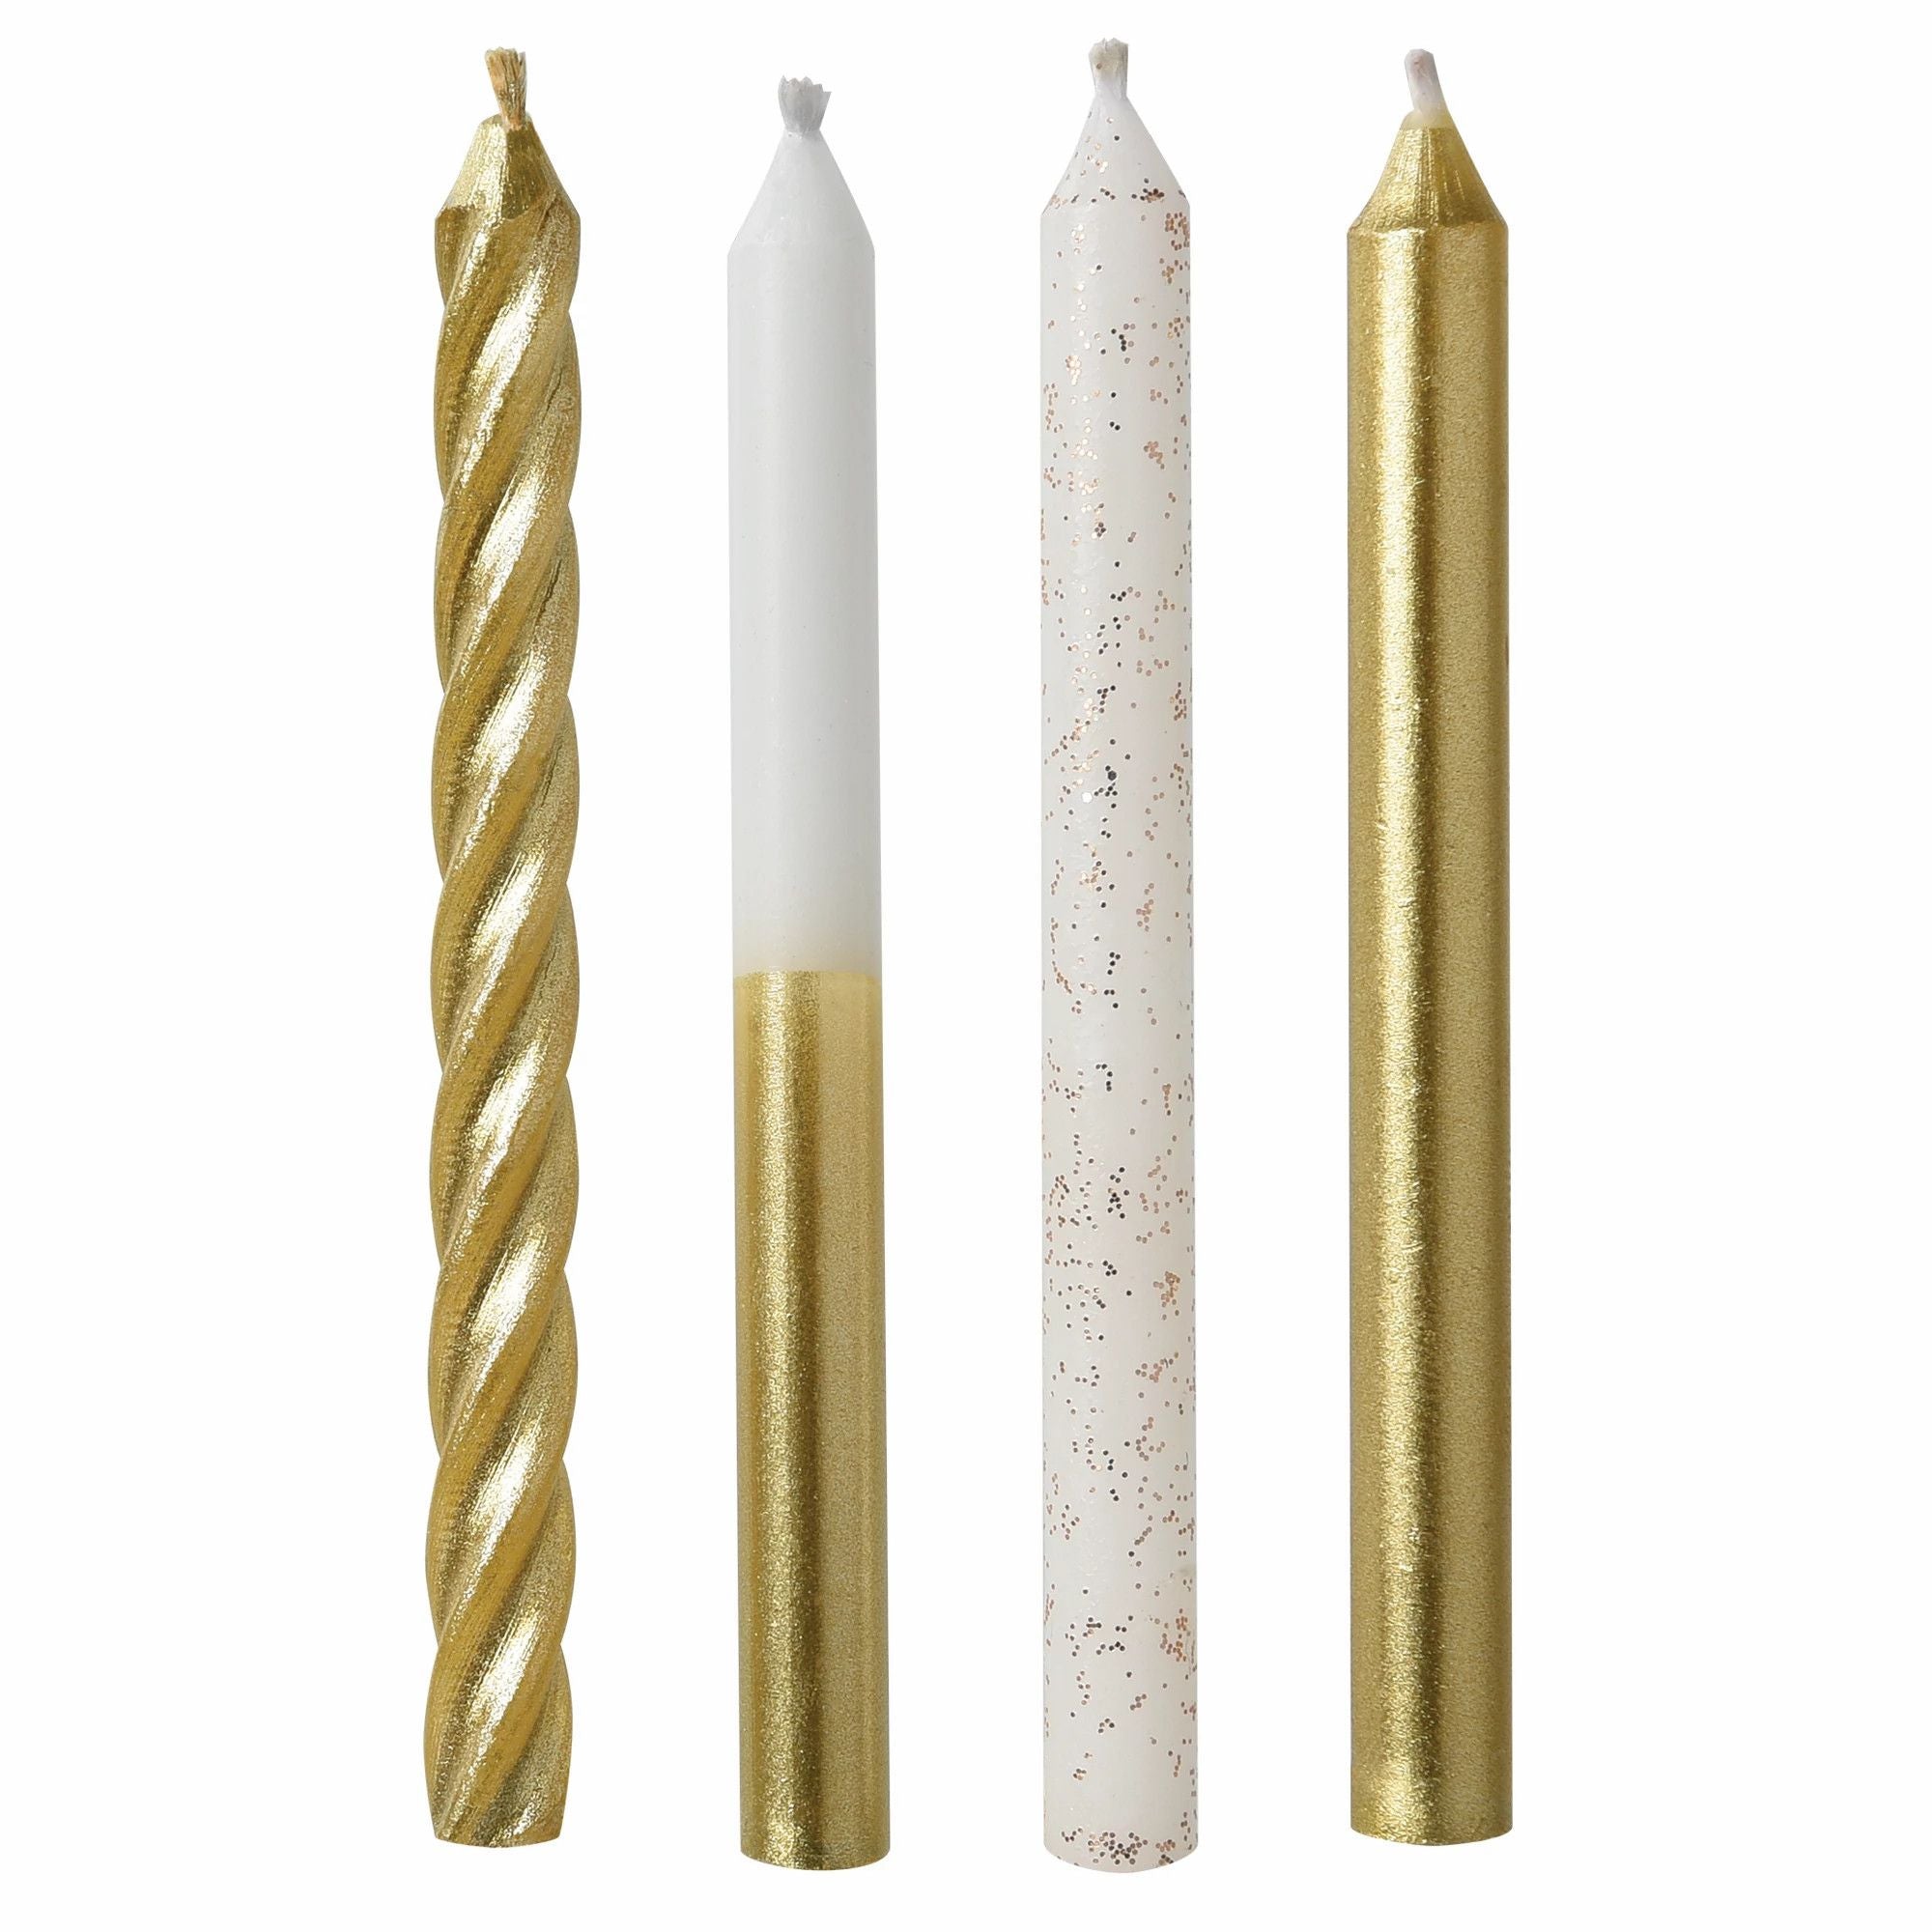 4 designs of gold and white candles